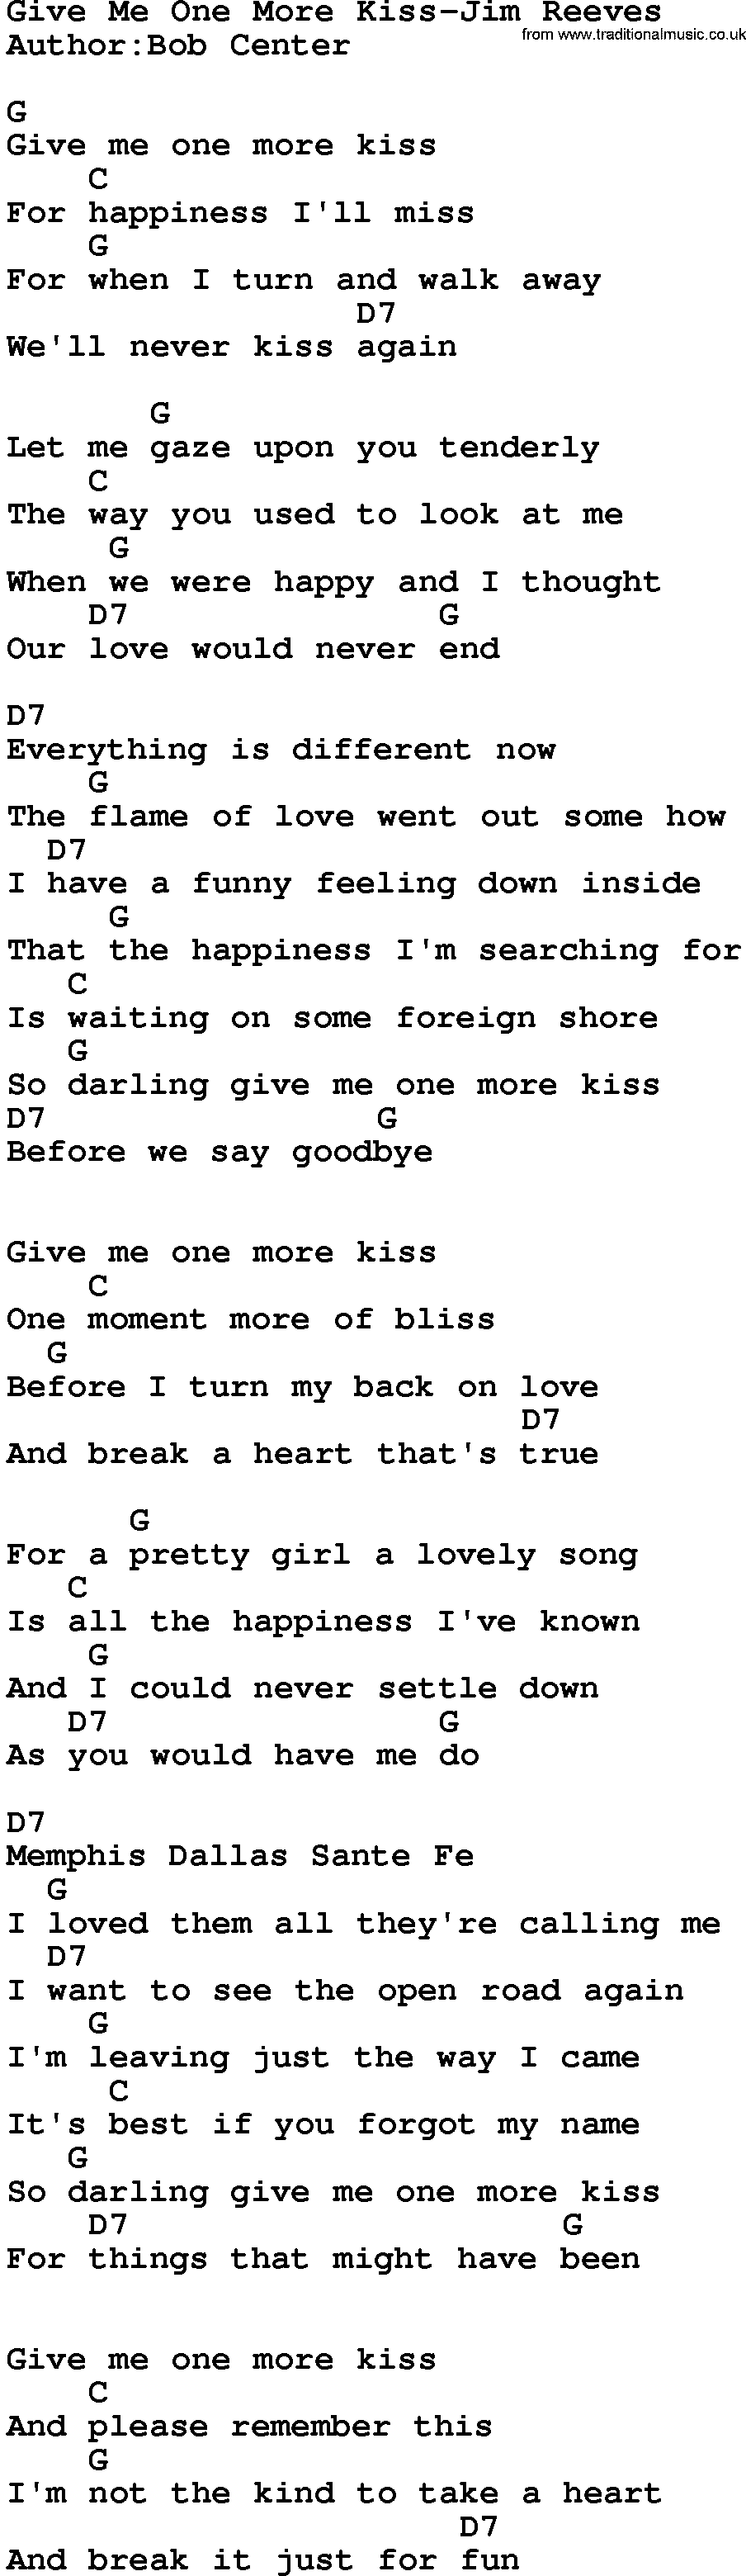 Country music song: Give Me One More Kiss-Jim Reeves lyrics and chords